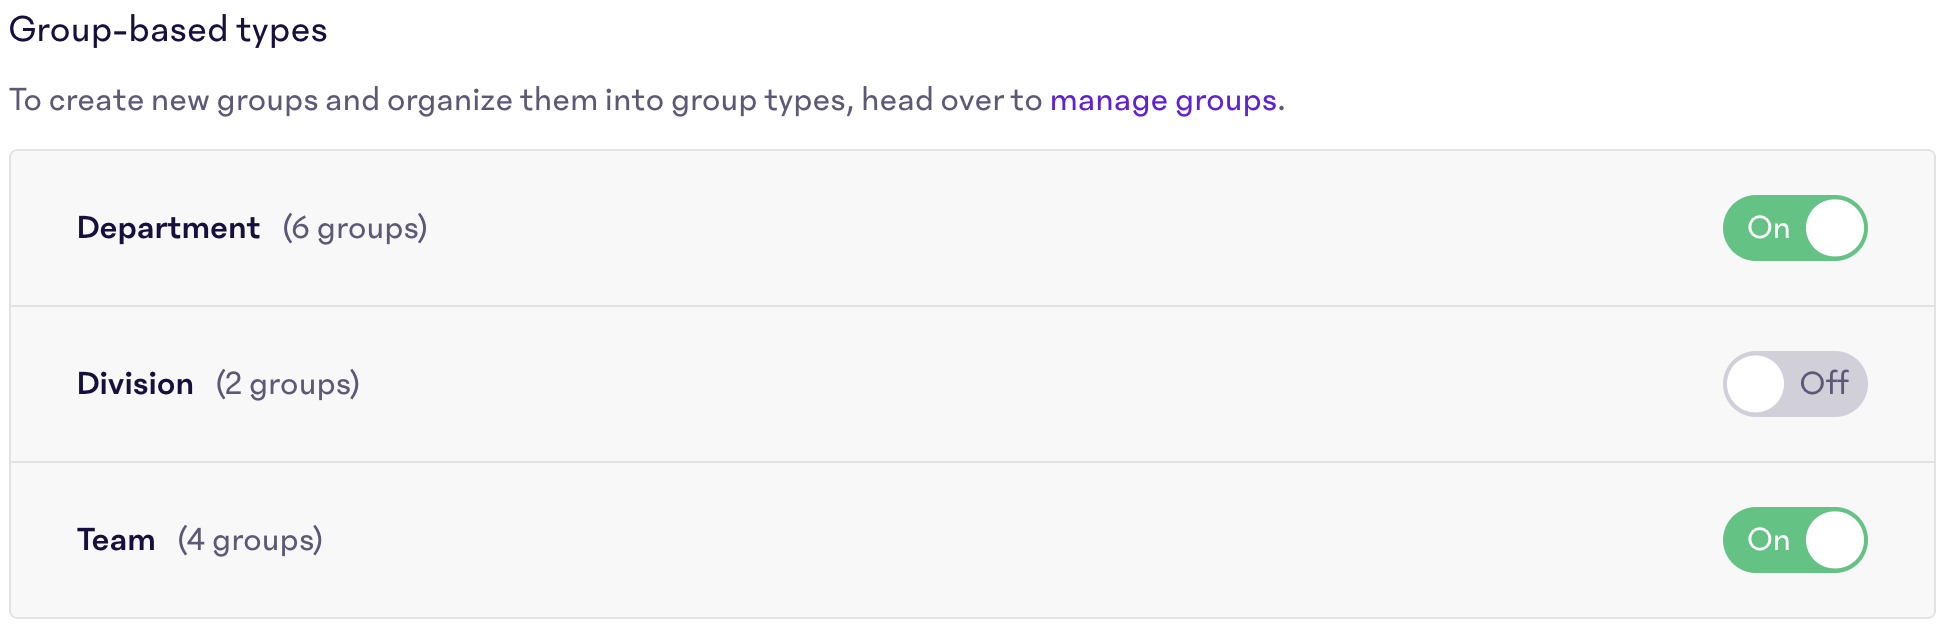 Group-Based-Types.png